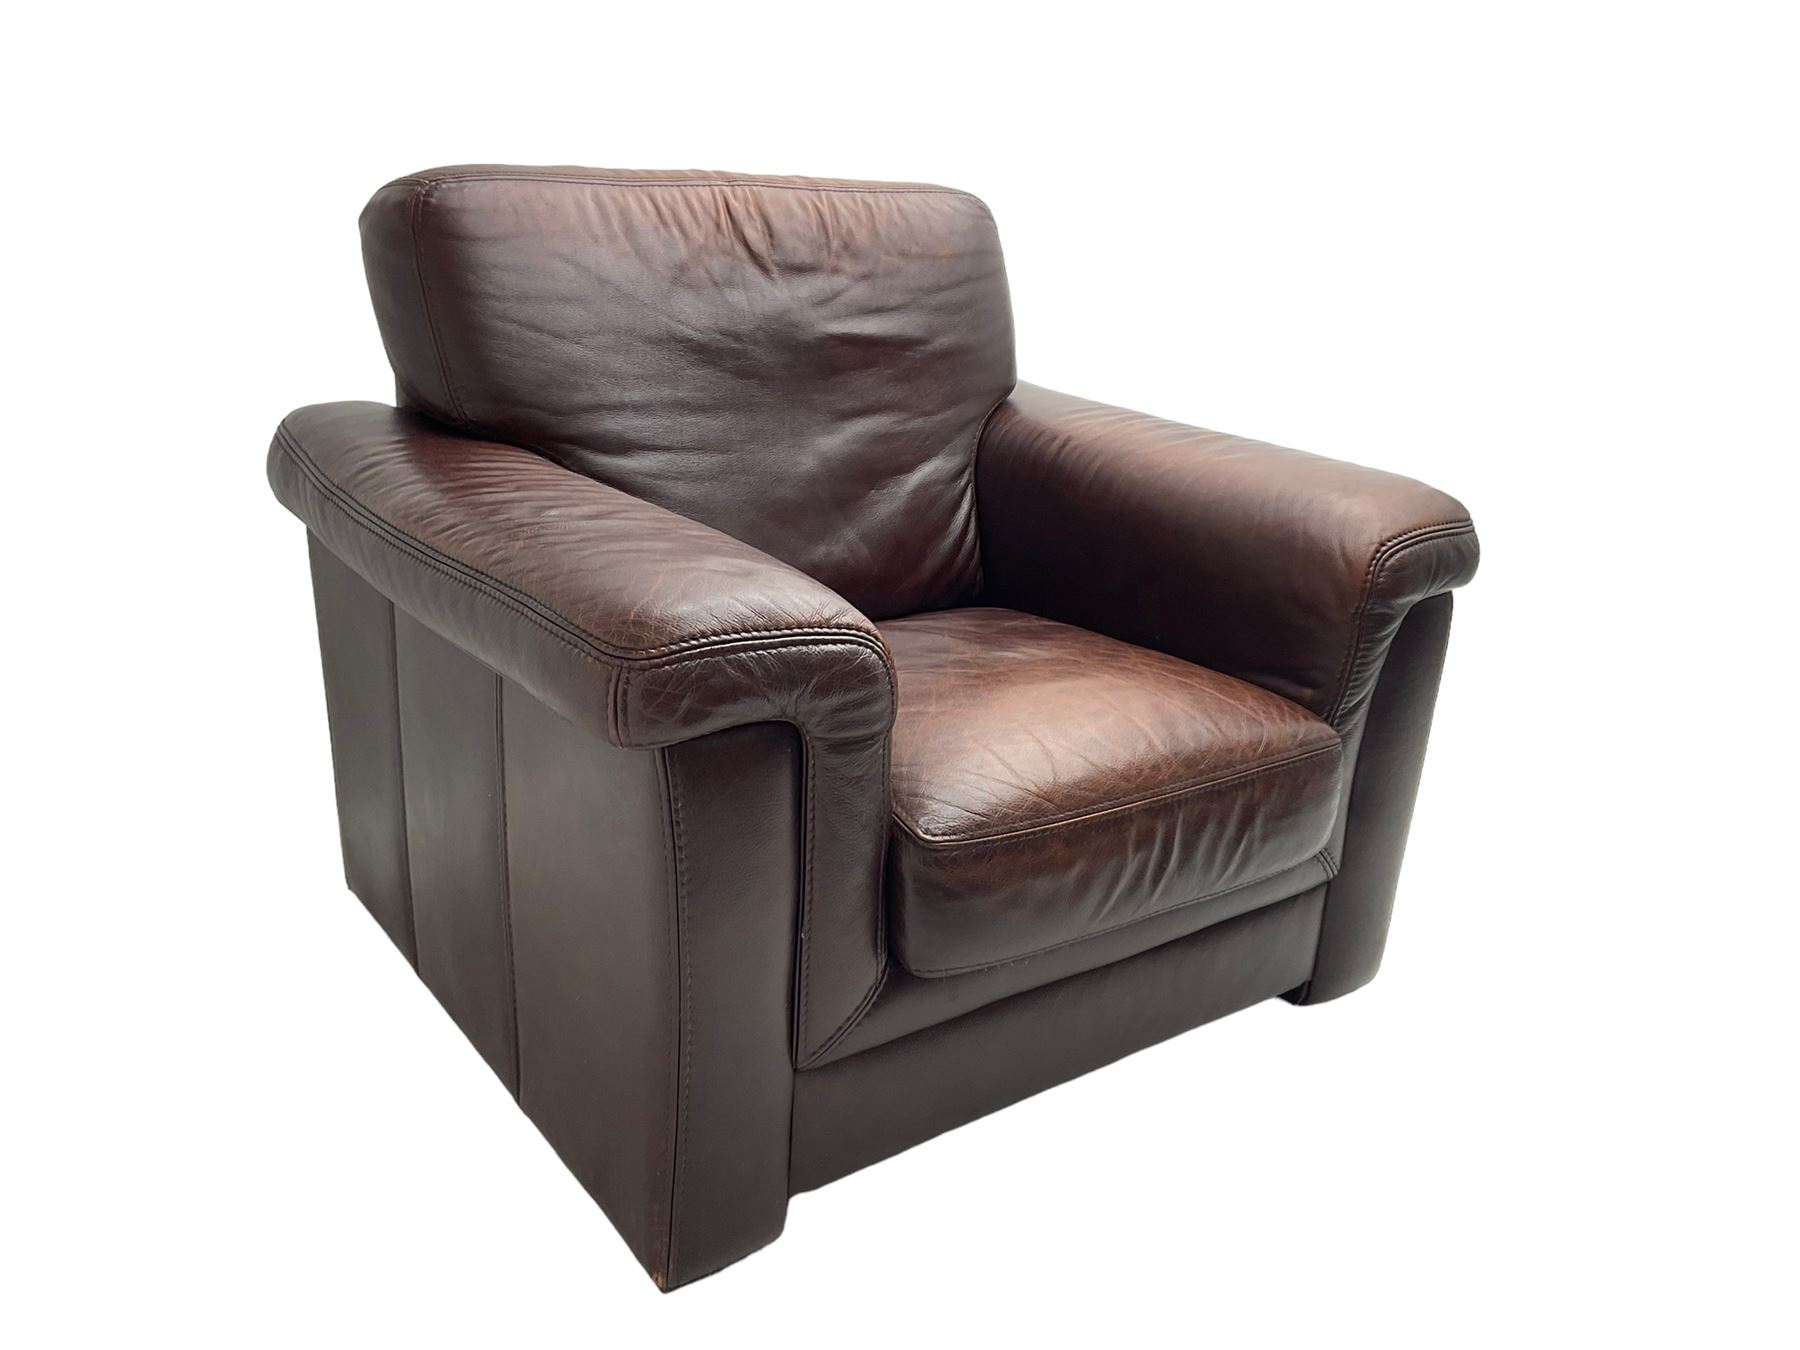 Large armchair upholstered in chocolate brown leather - Image 6 of 6